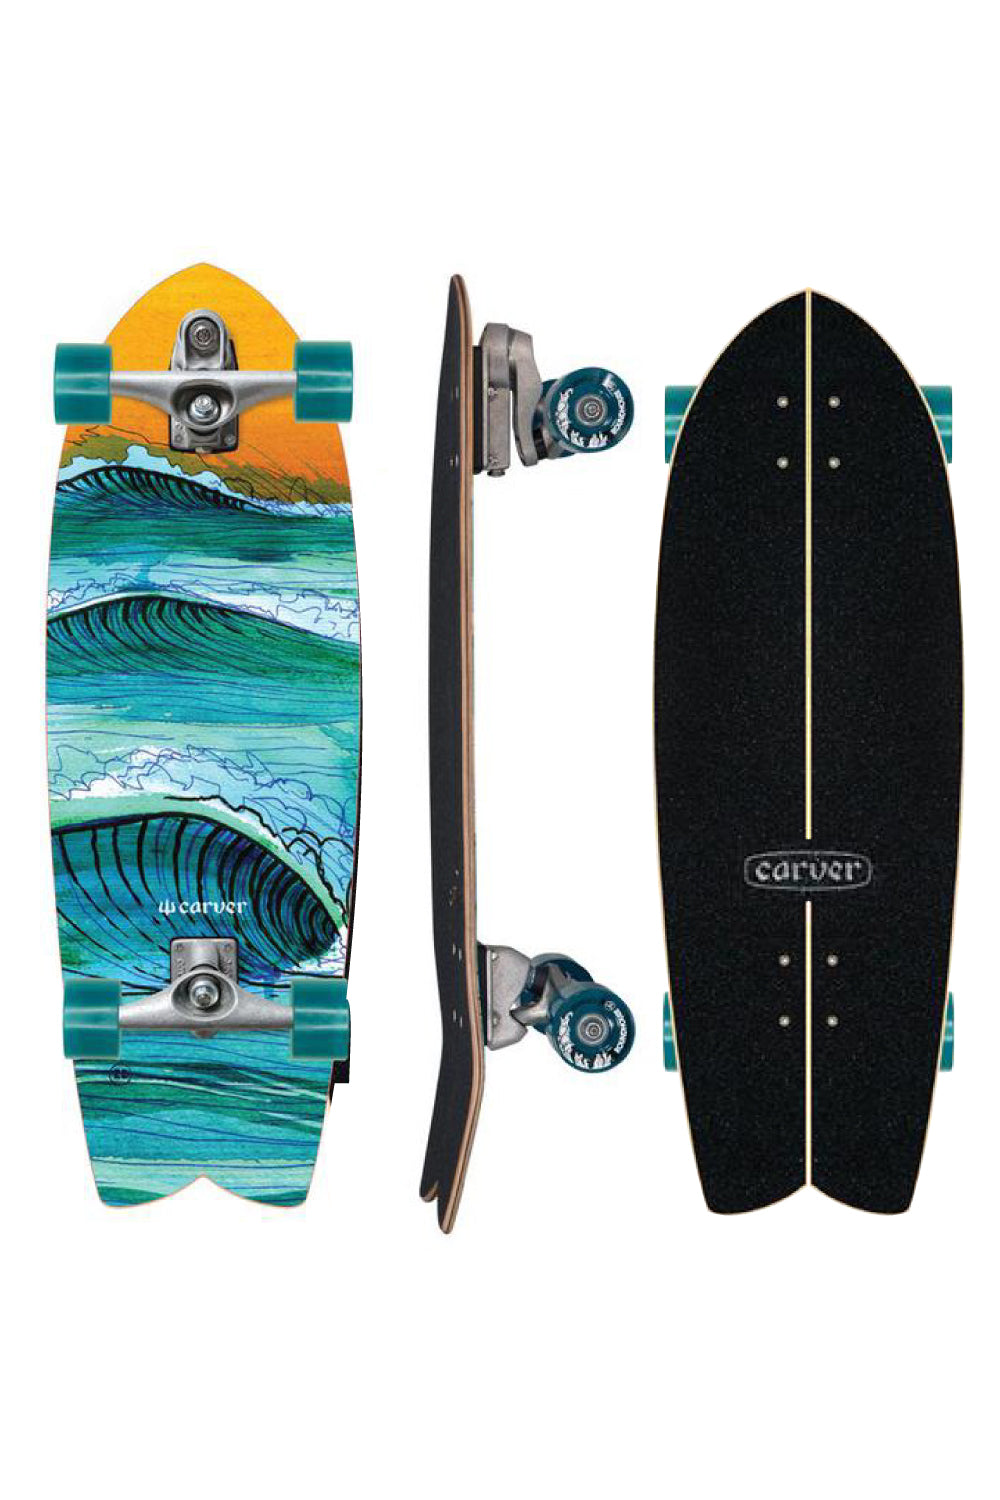 Carver 29.5" Swallow Complete Surfskate - C7 Truck